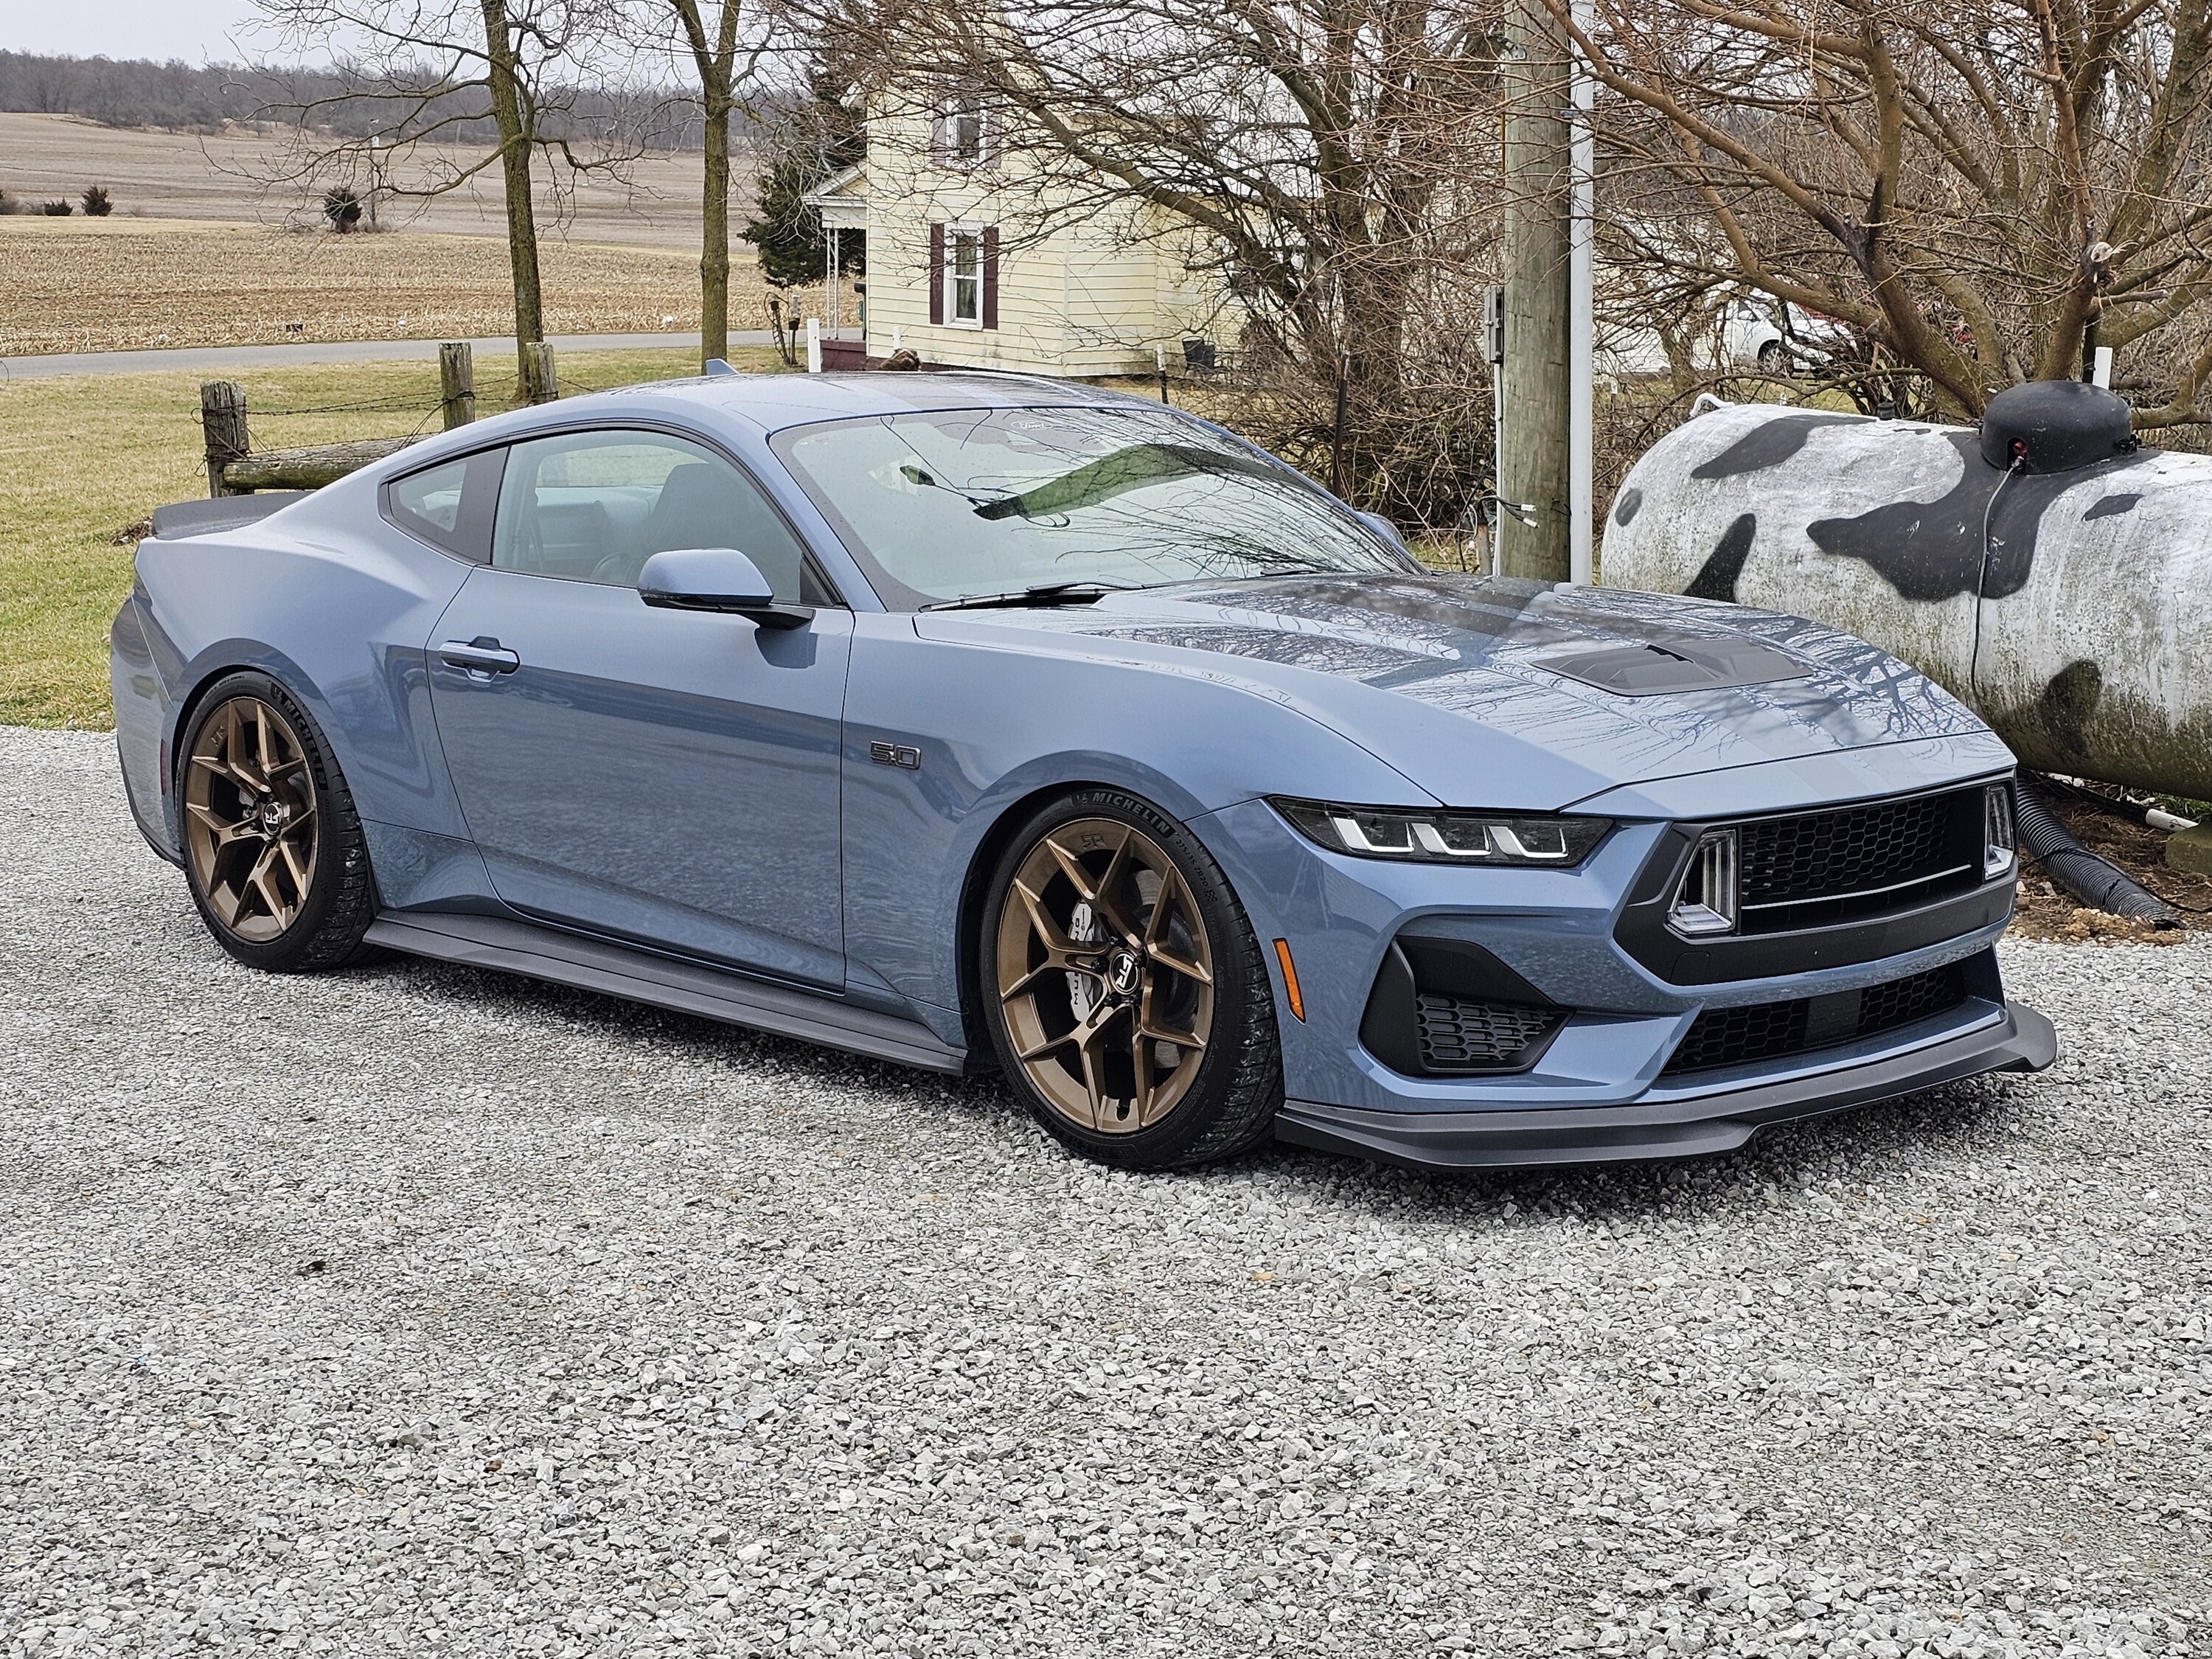 S650 Mustang What's going on with Vapor Blue colour?? Some doubts about the true tone 20240301_142327